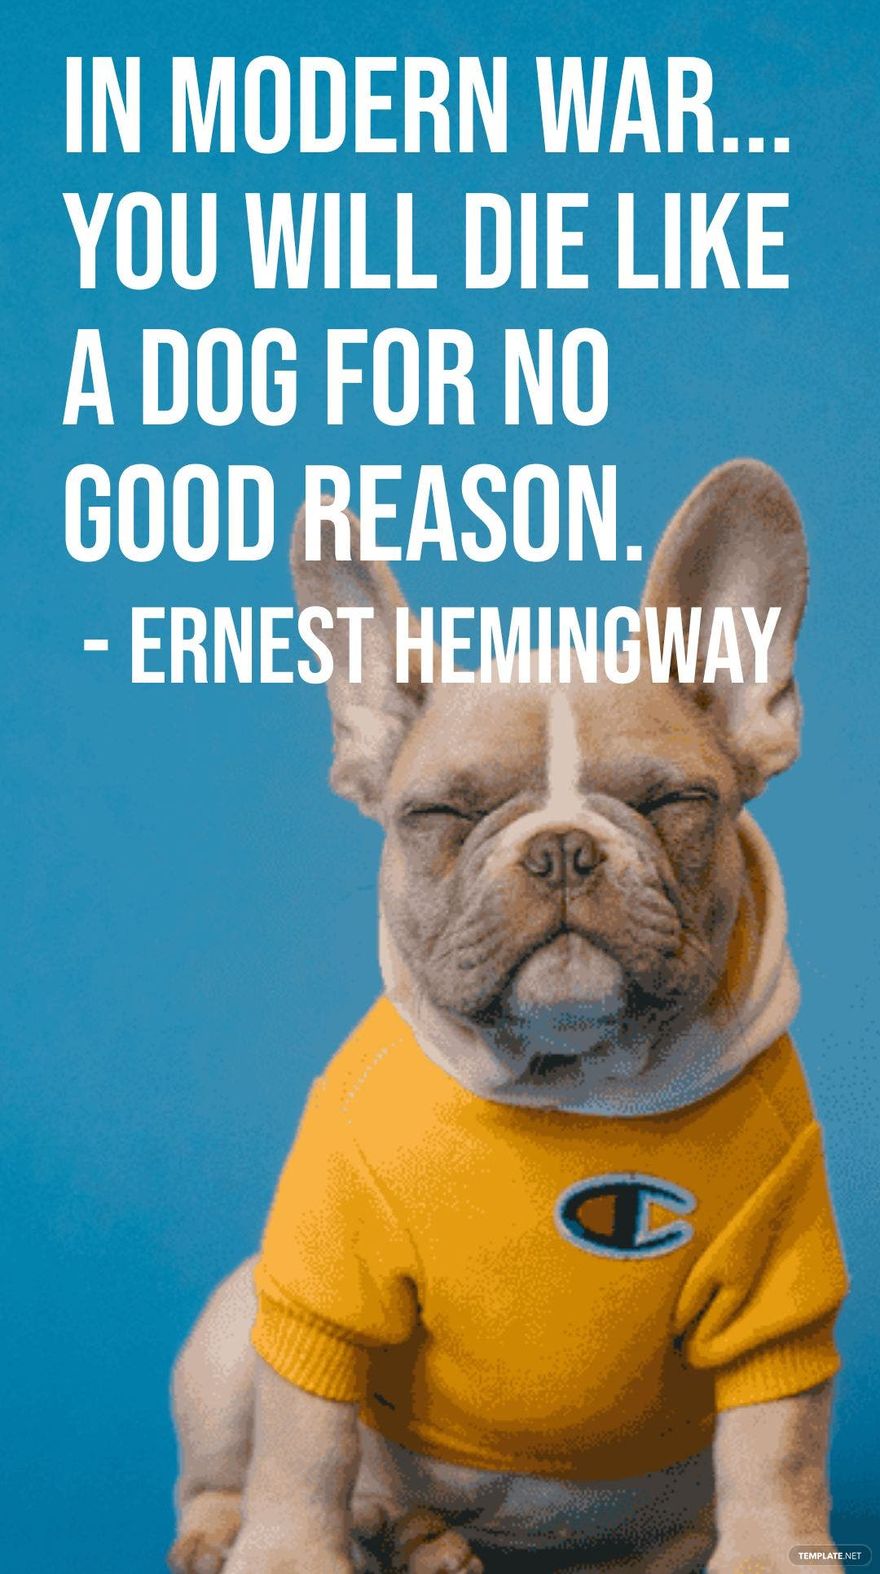 Ernest Hemingway - In modern war... you will die like a dog for no good reason.